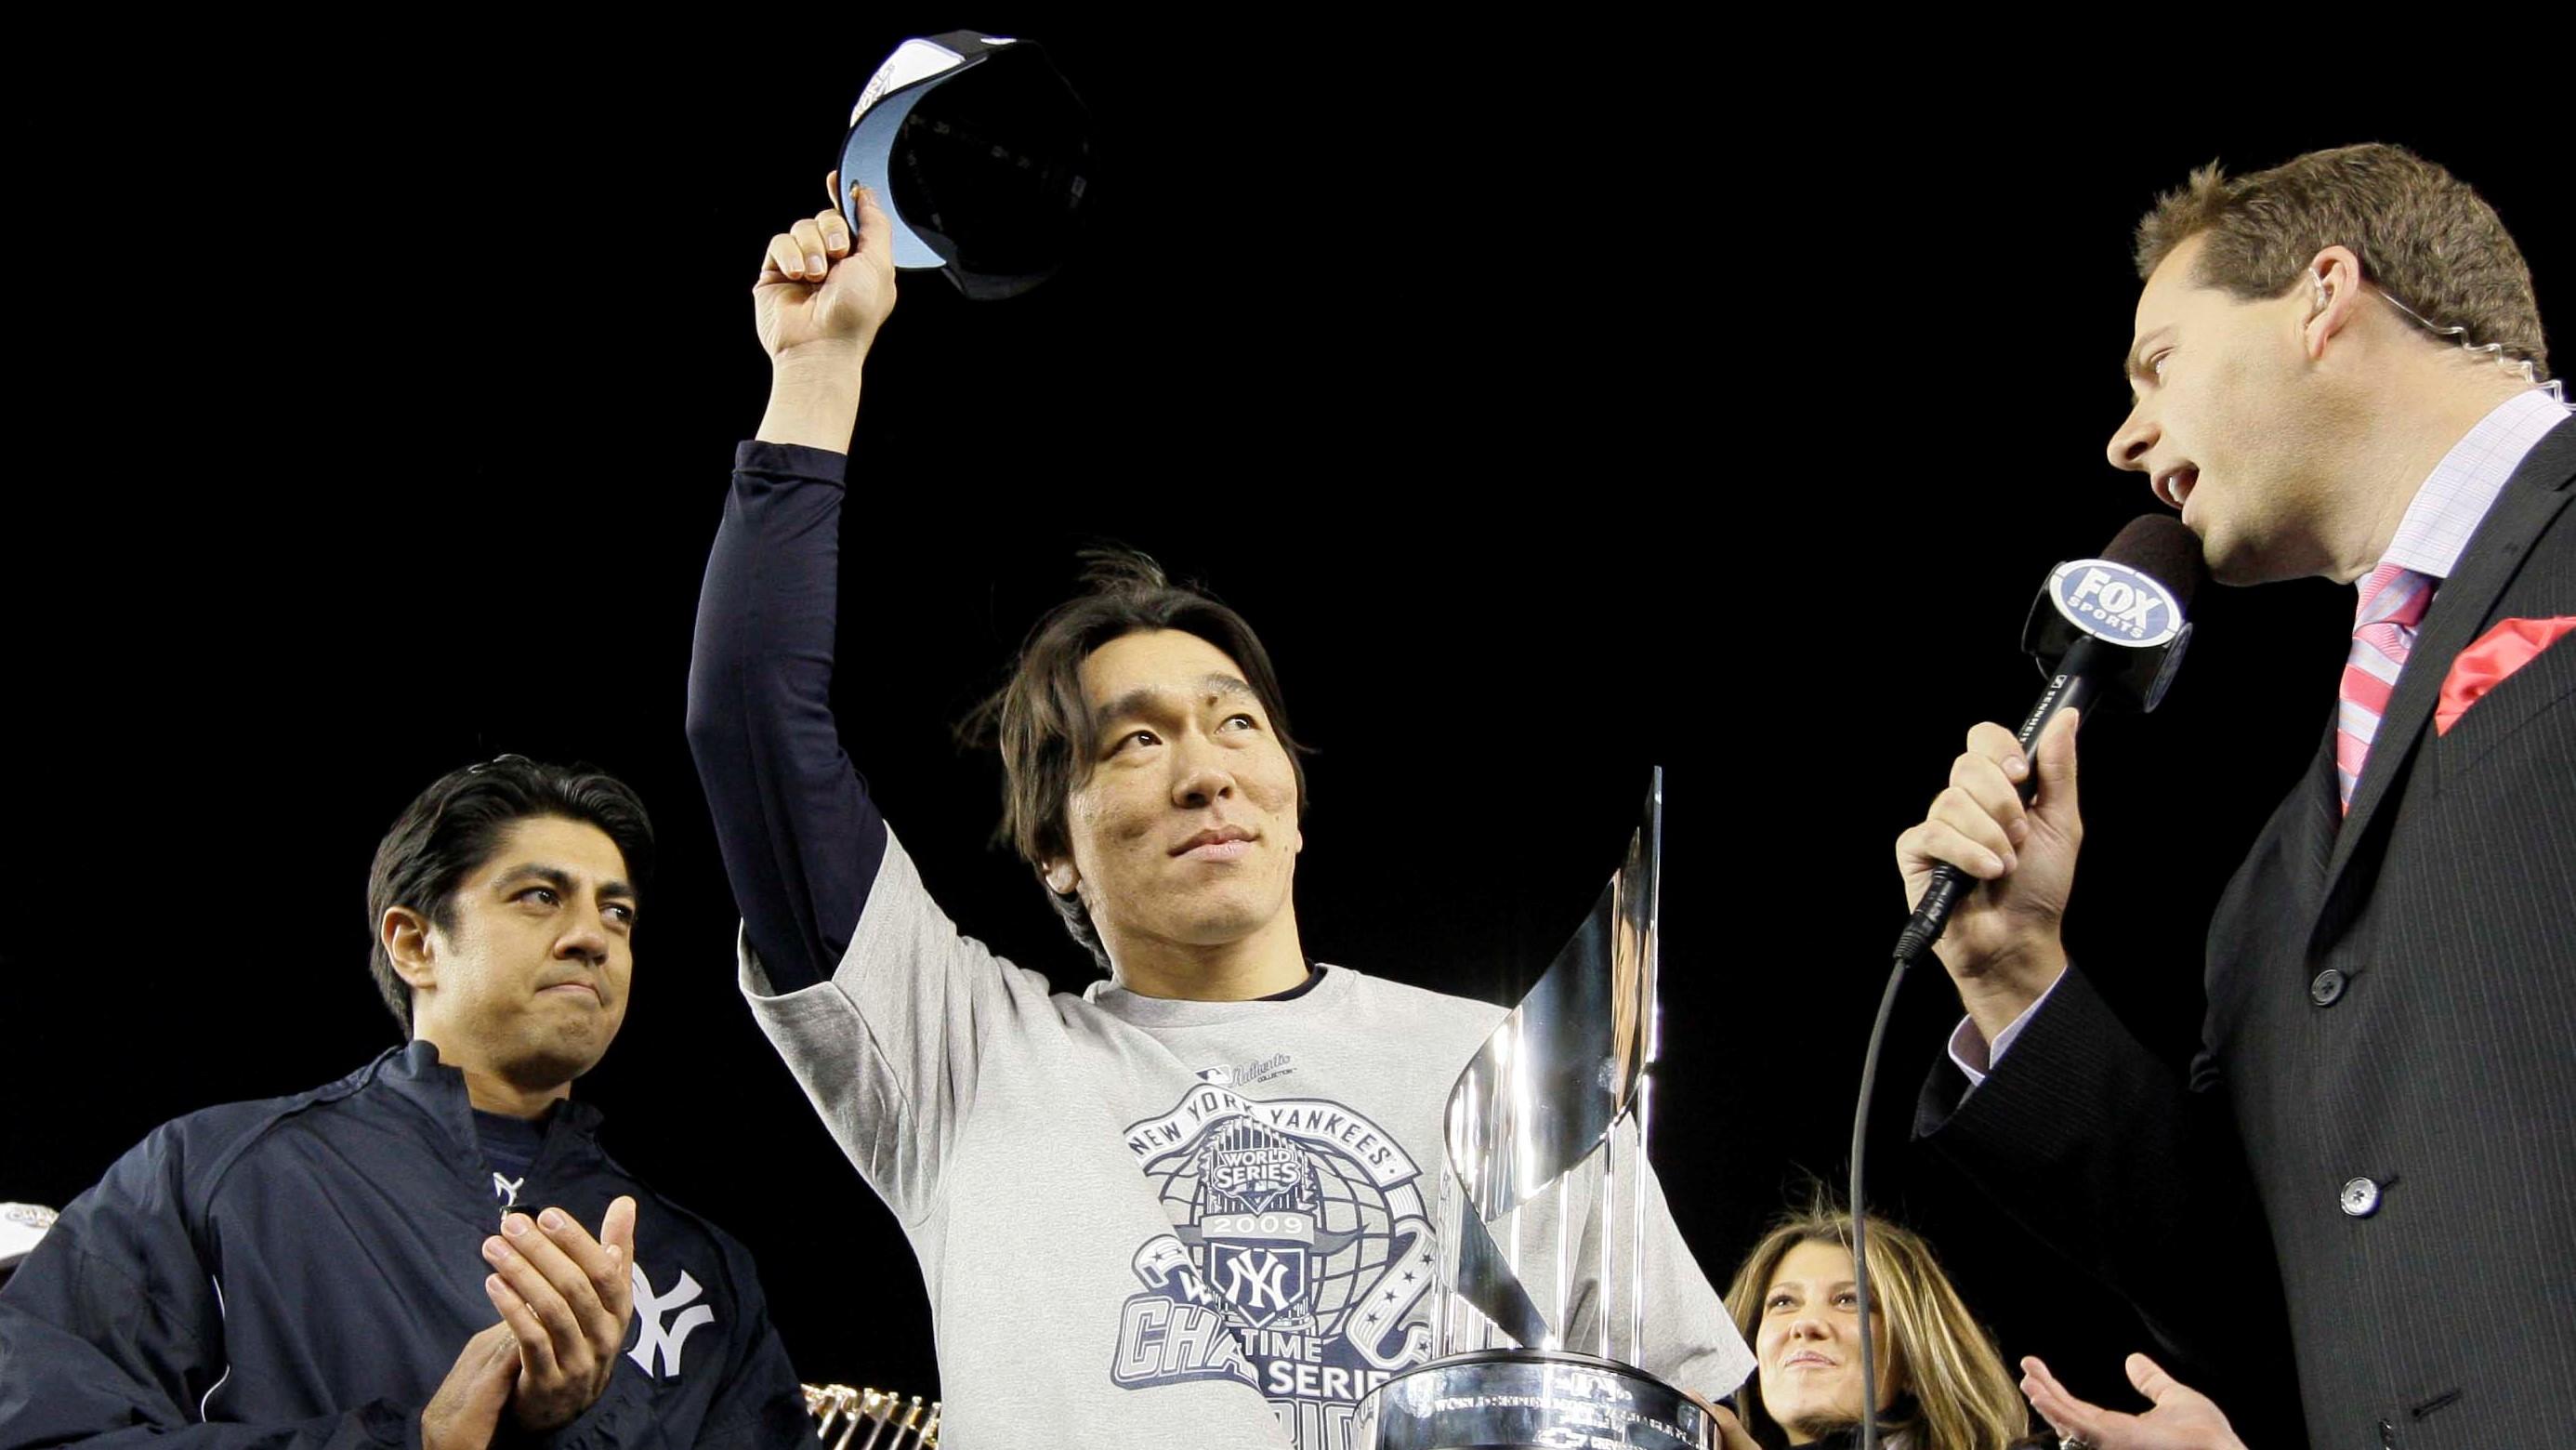 Nov 4, 2009; Bronx, NY, USA; New York Yankees designated hitter Hideki Matsui (center) waves to the crowd after being named the MVP of the World Series after defeating the Philadelphia Phillies 7-4 in game six of the 2009 World Series at Yankee Stadium. Mandatory Credit: David J. Phillip/Pool Photo via USA TODAY Sports / David J. Phillip/Pool Photo via USA TODAY Sports